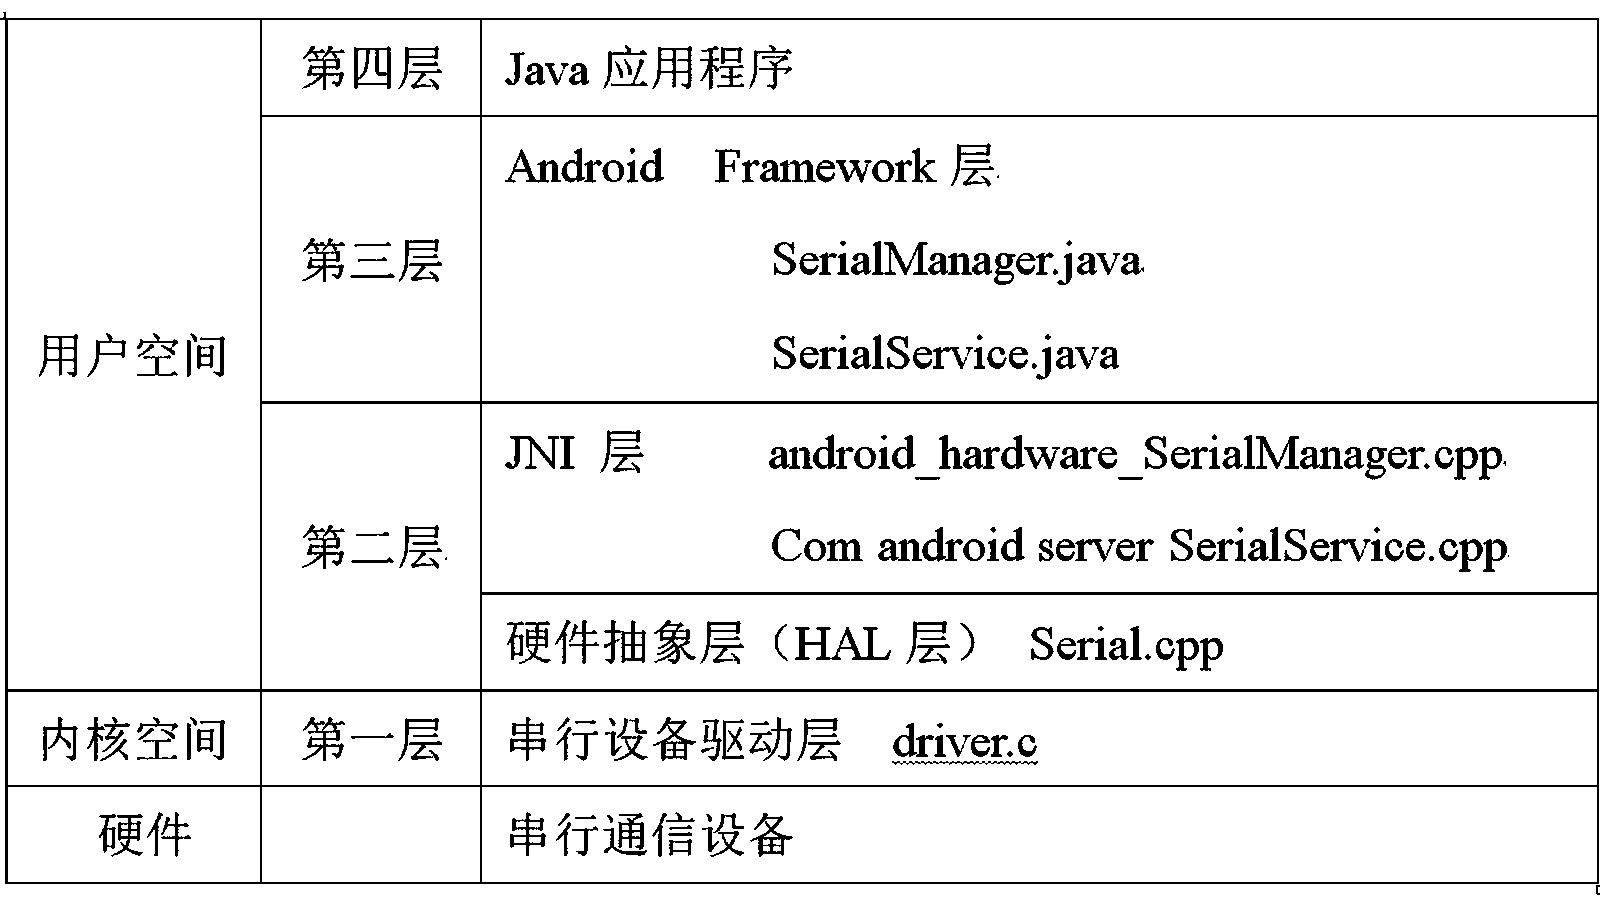 Universal serial device communication module based on Android system